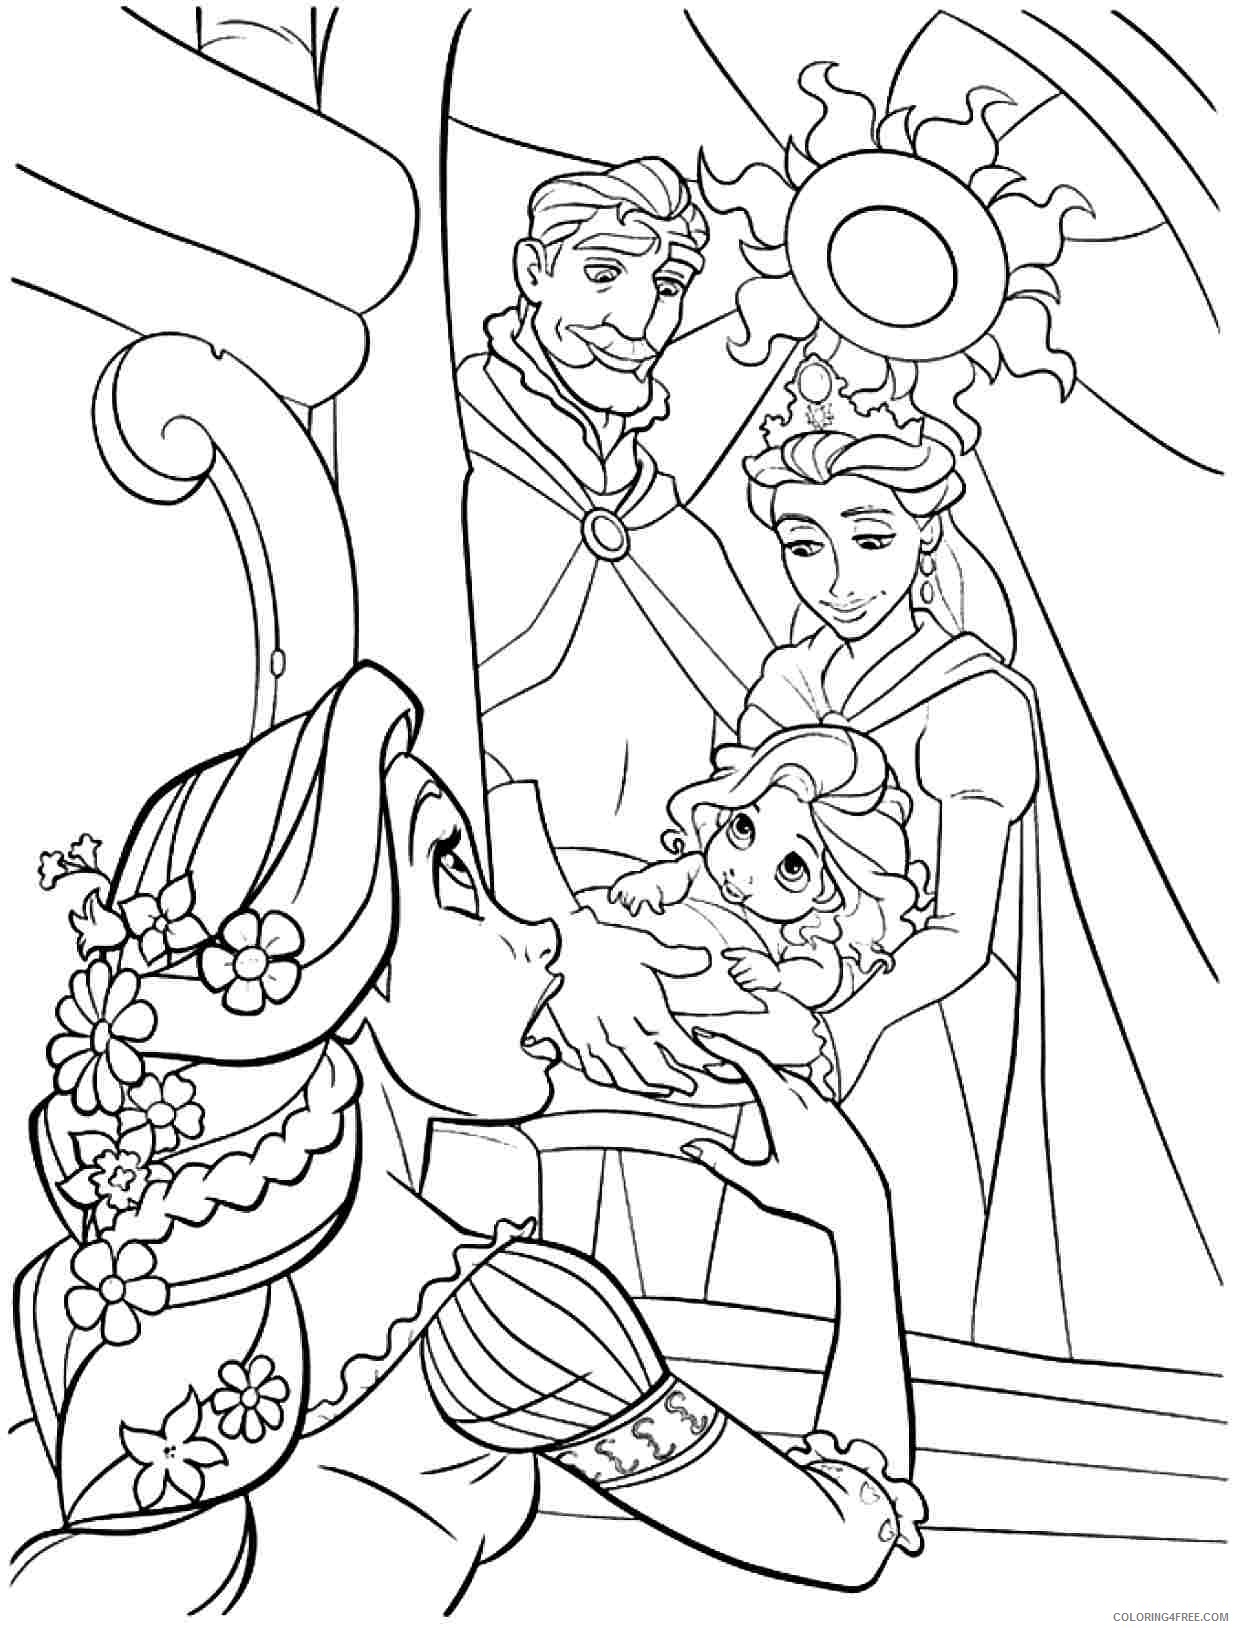 Rapunzel Coloring Pages Cartoons Baby Rapunzel Printable 2020 5274 Coloring4free